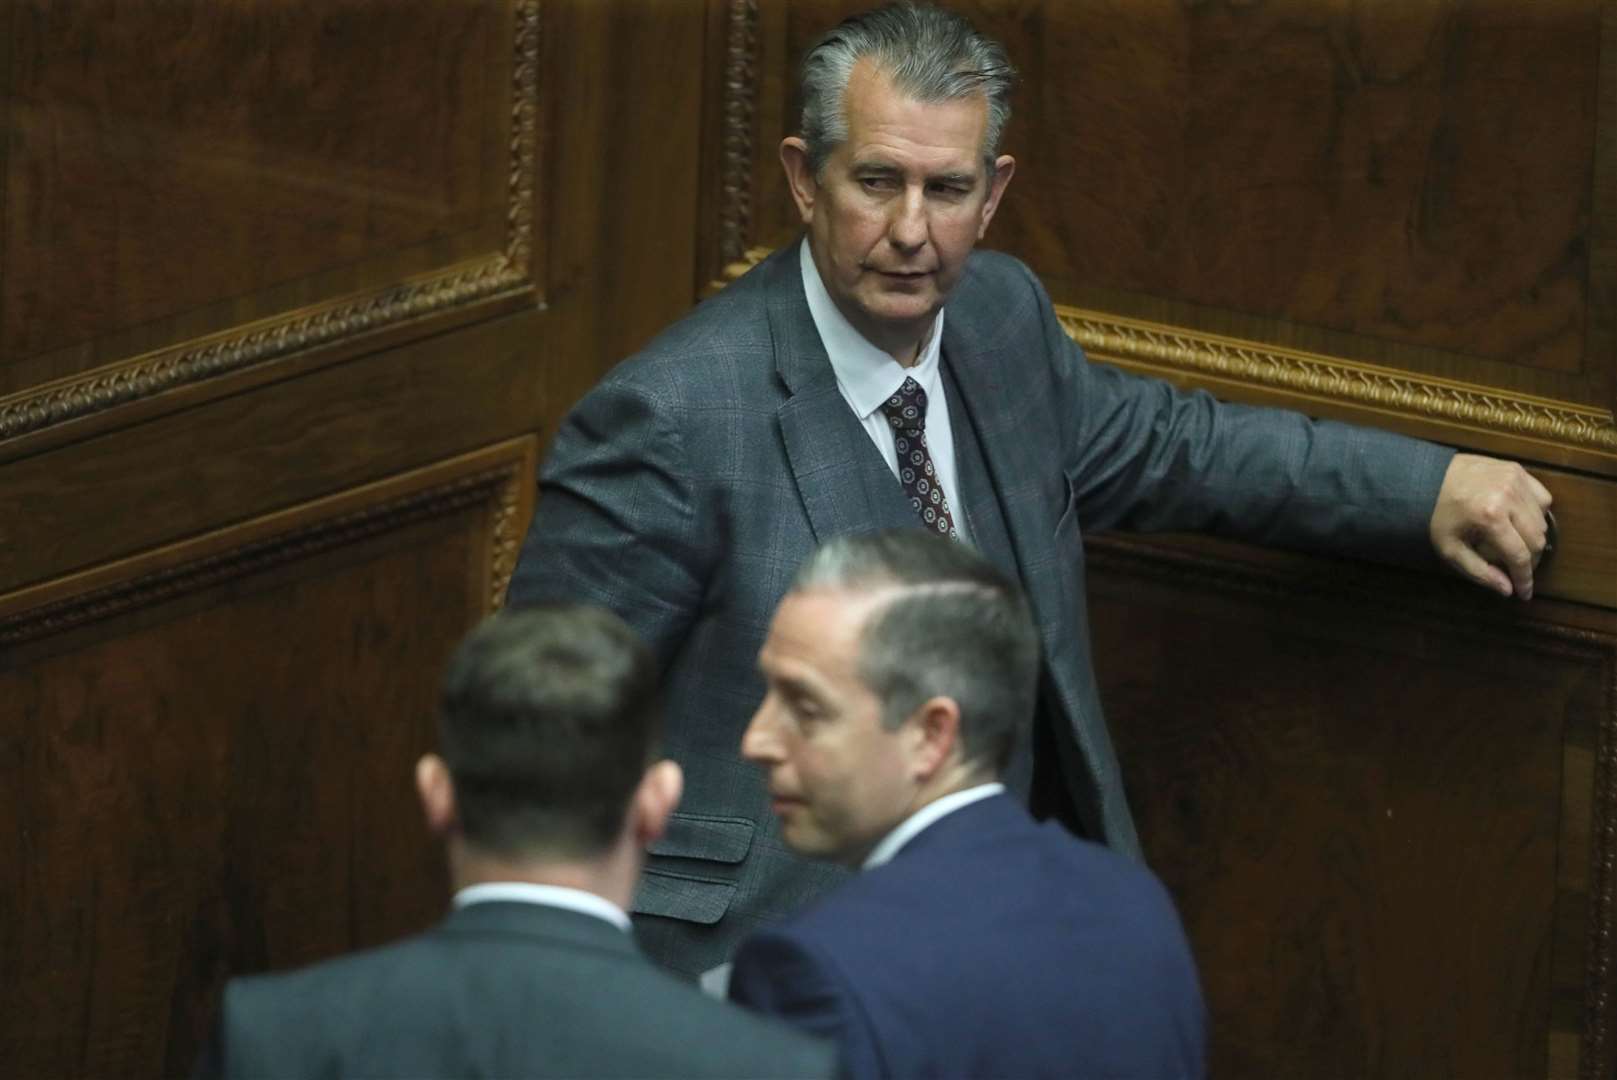 Edwin Poots leaving the Assembly chamber after nominating Paul Givan, bottom right, as First Minister hours before resigning as DUP leader (Brian Lawless/PA)